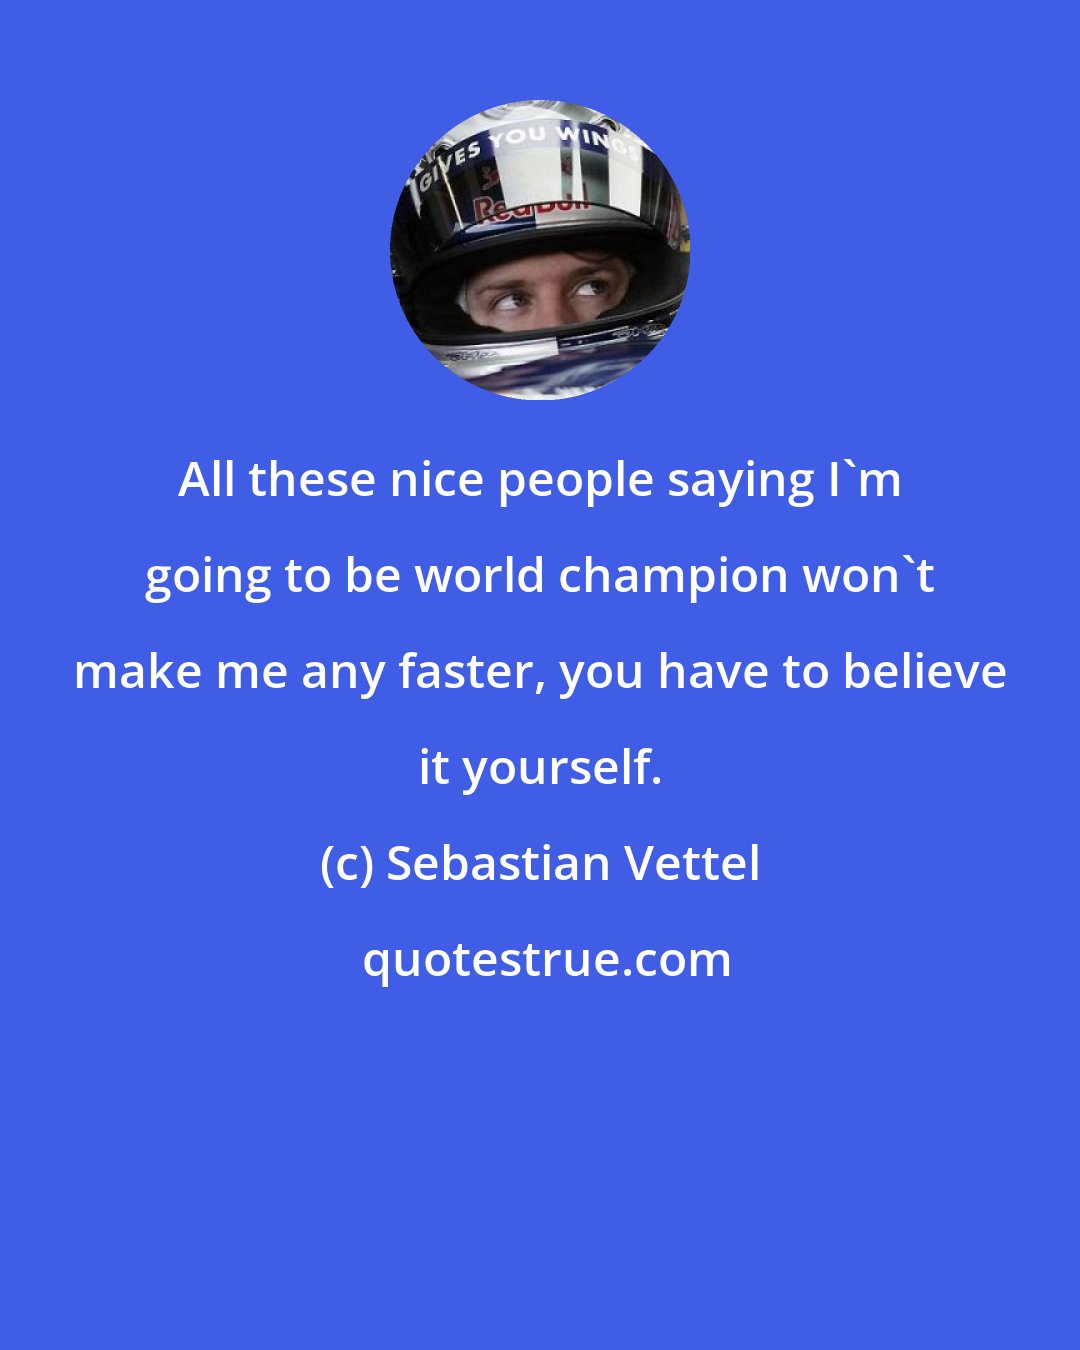 Sebastian Vettel: All these nice people saying I'm going to be world champion won't make me any faster, you have to believe it yourself.